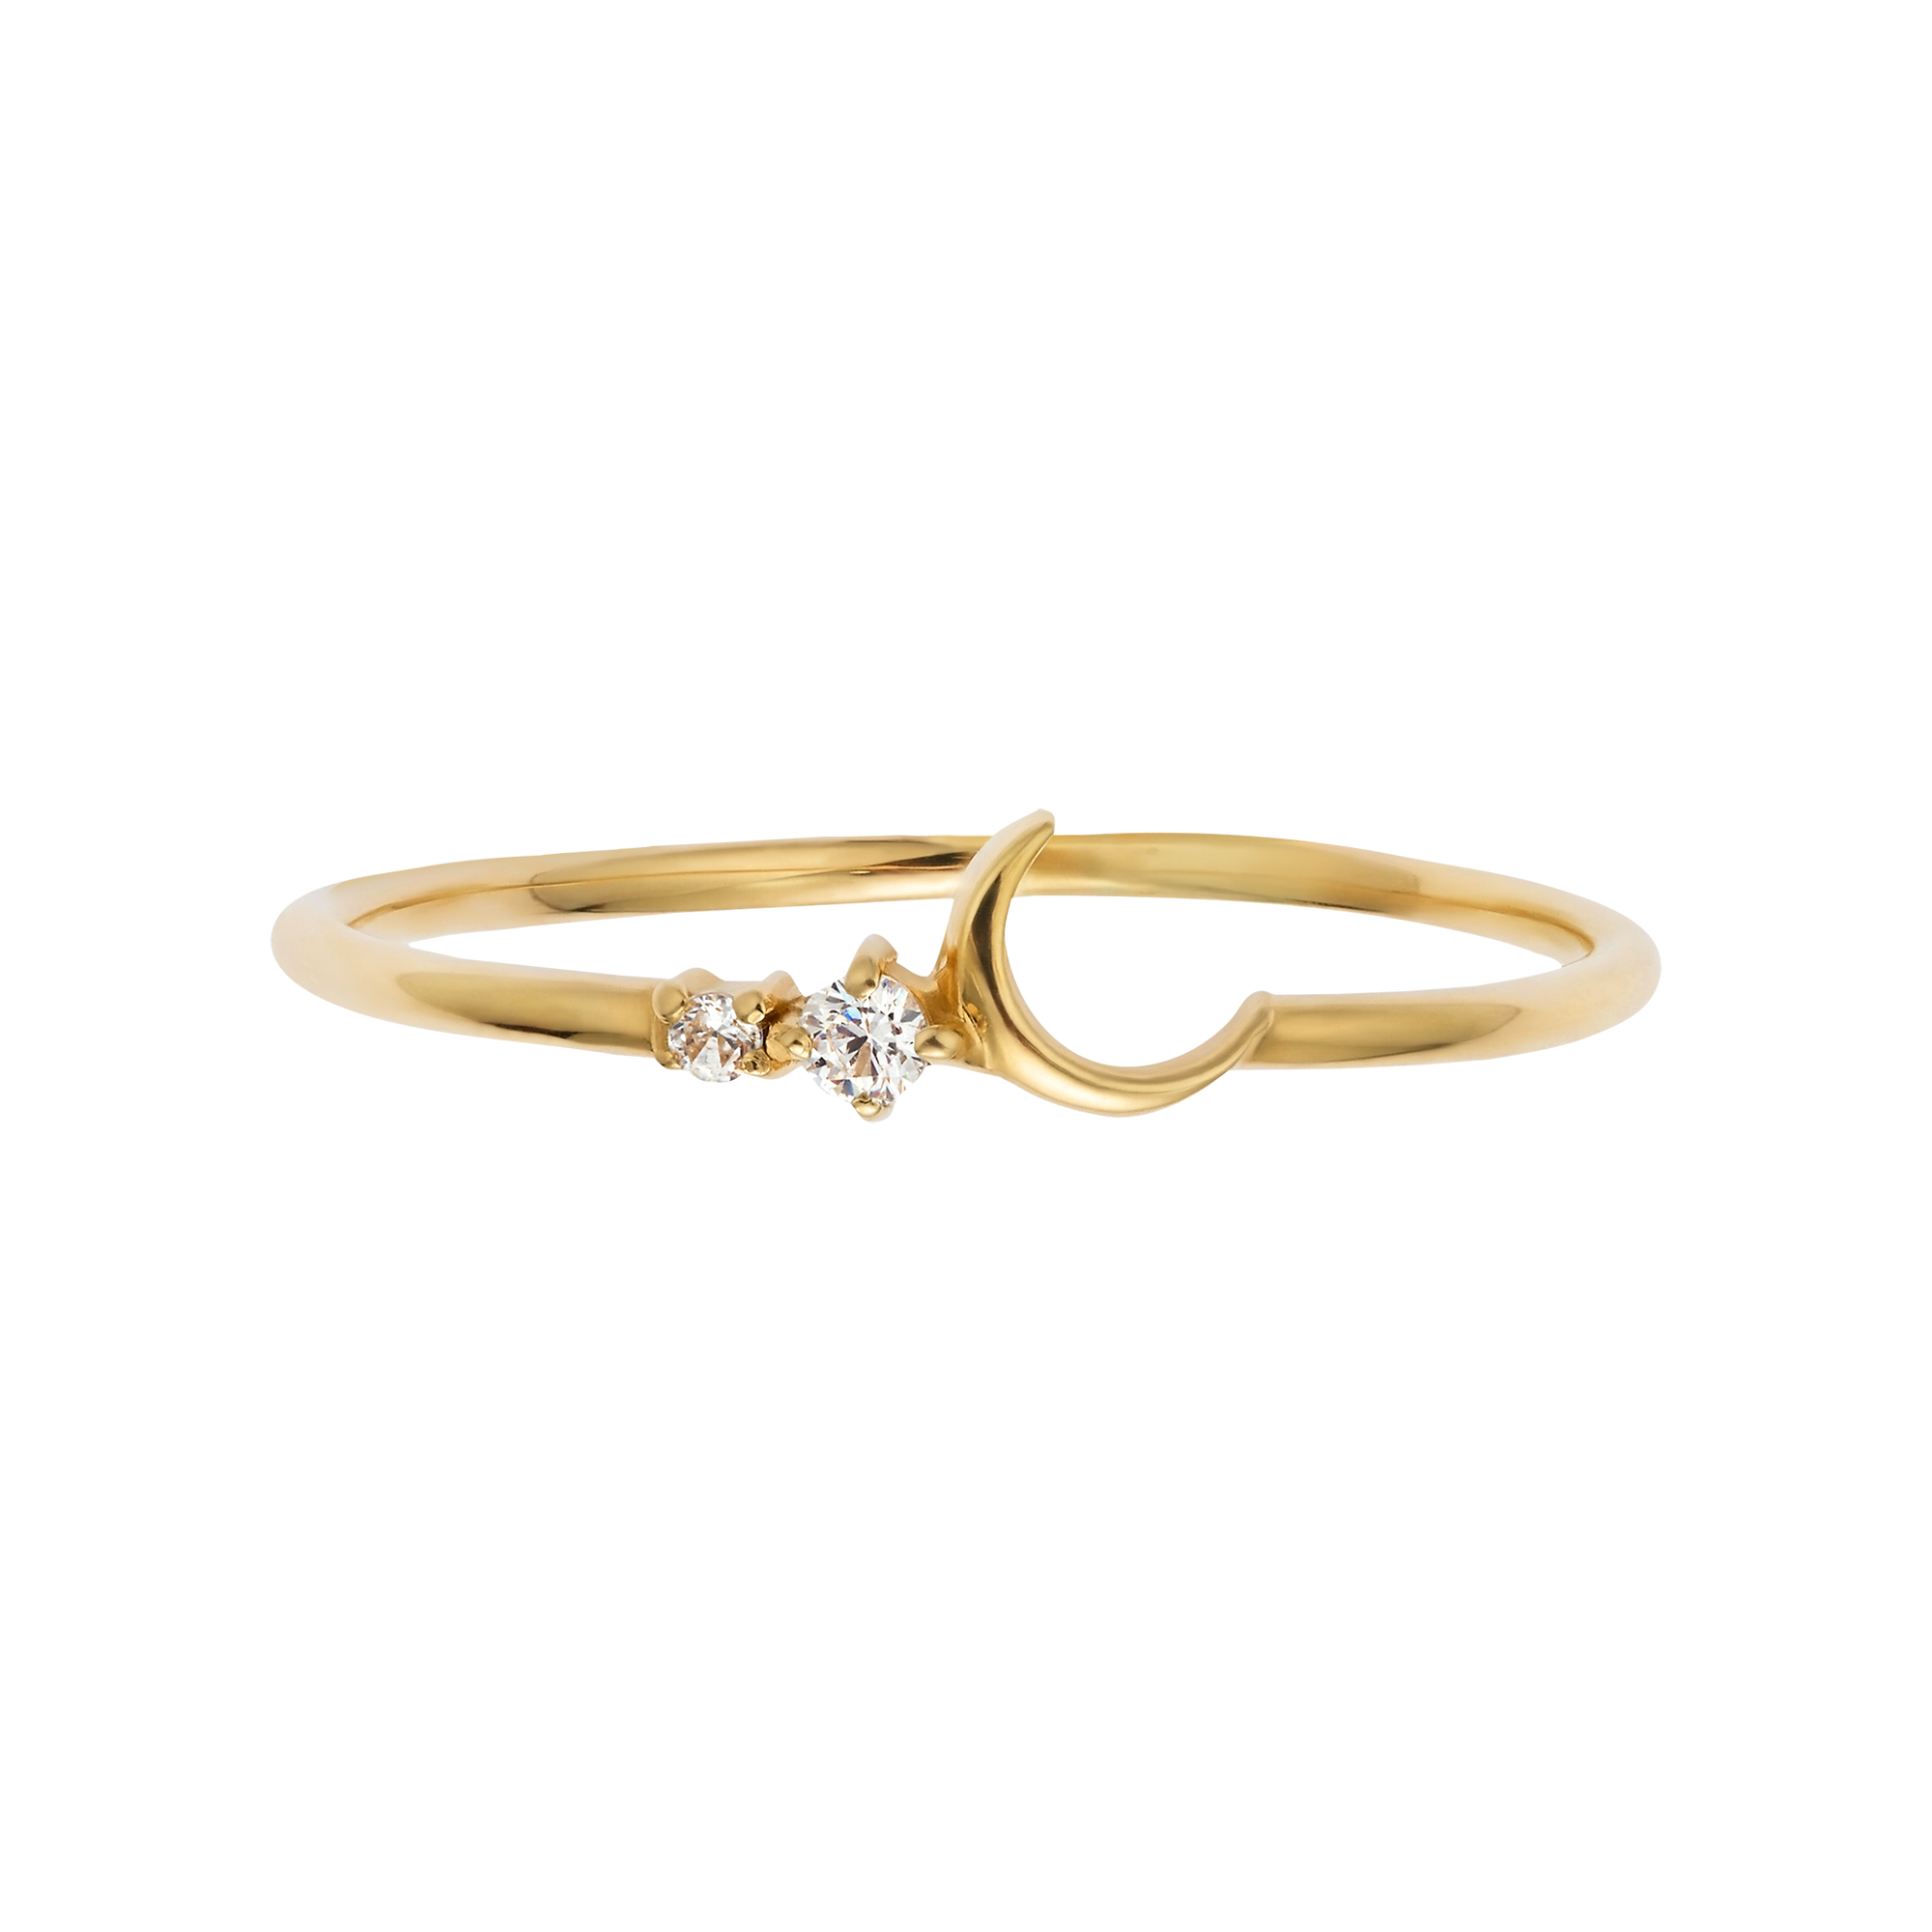 10K Gold Solid Nugget Ring Thin Gold Ring|Amazon.com